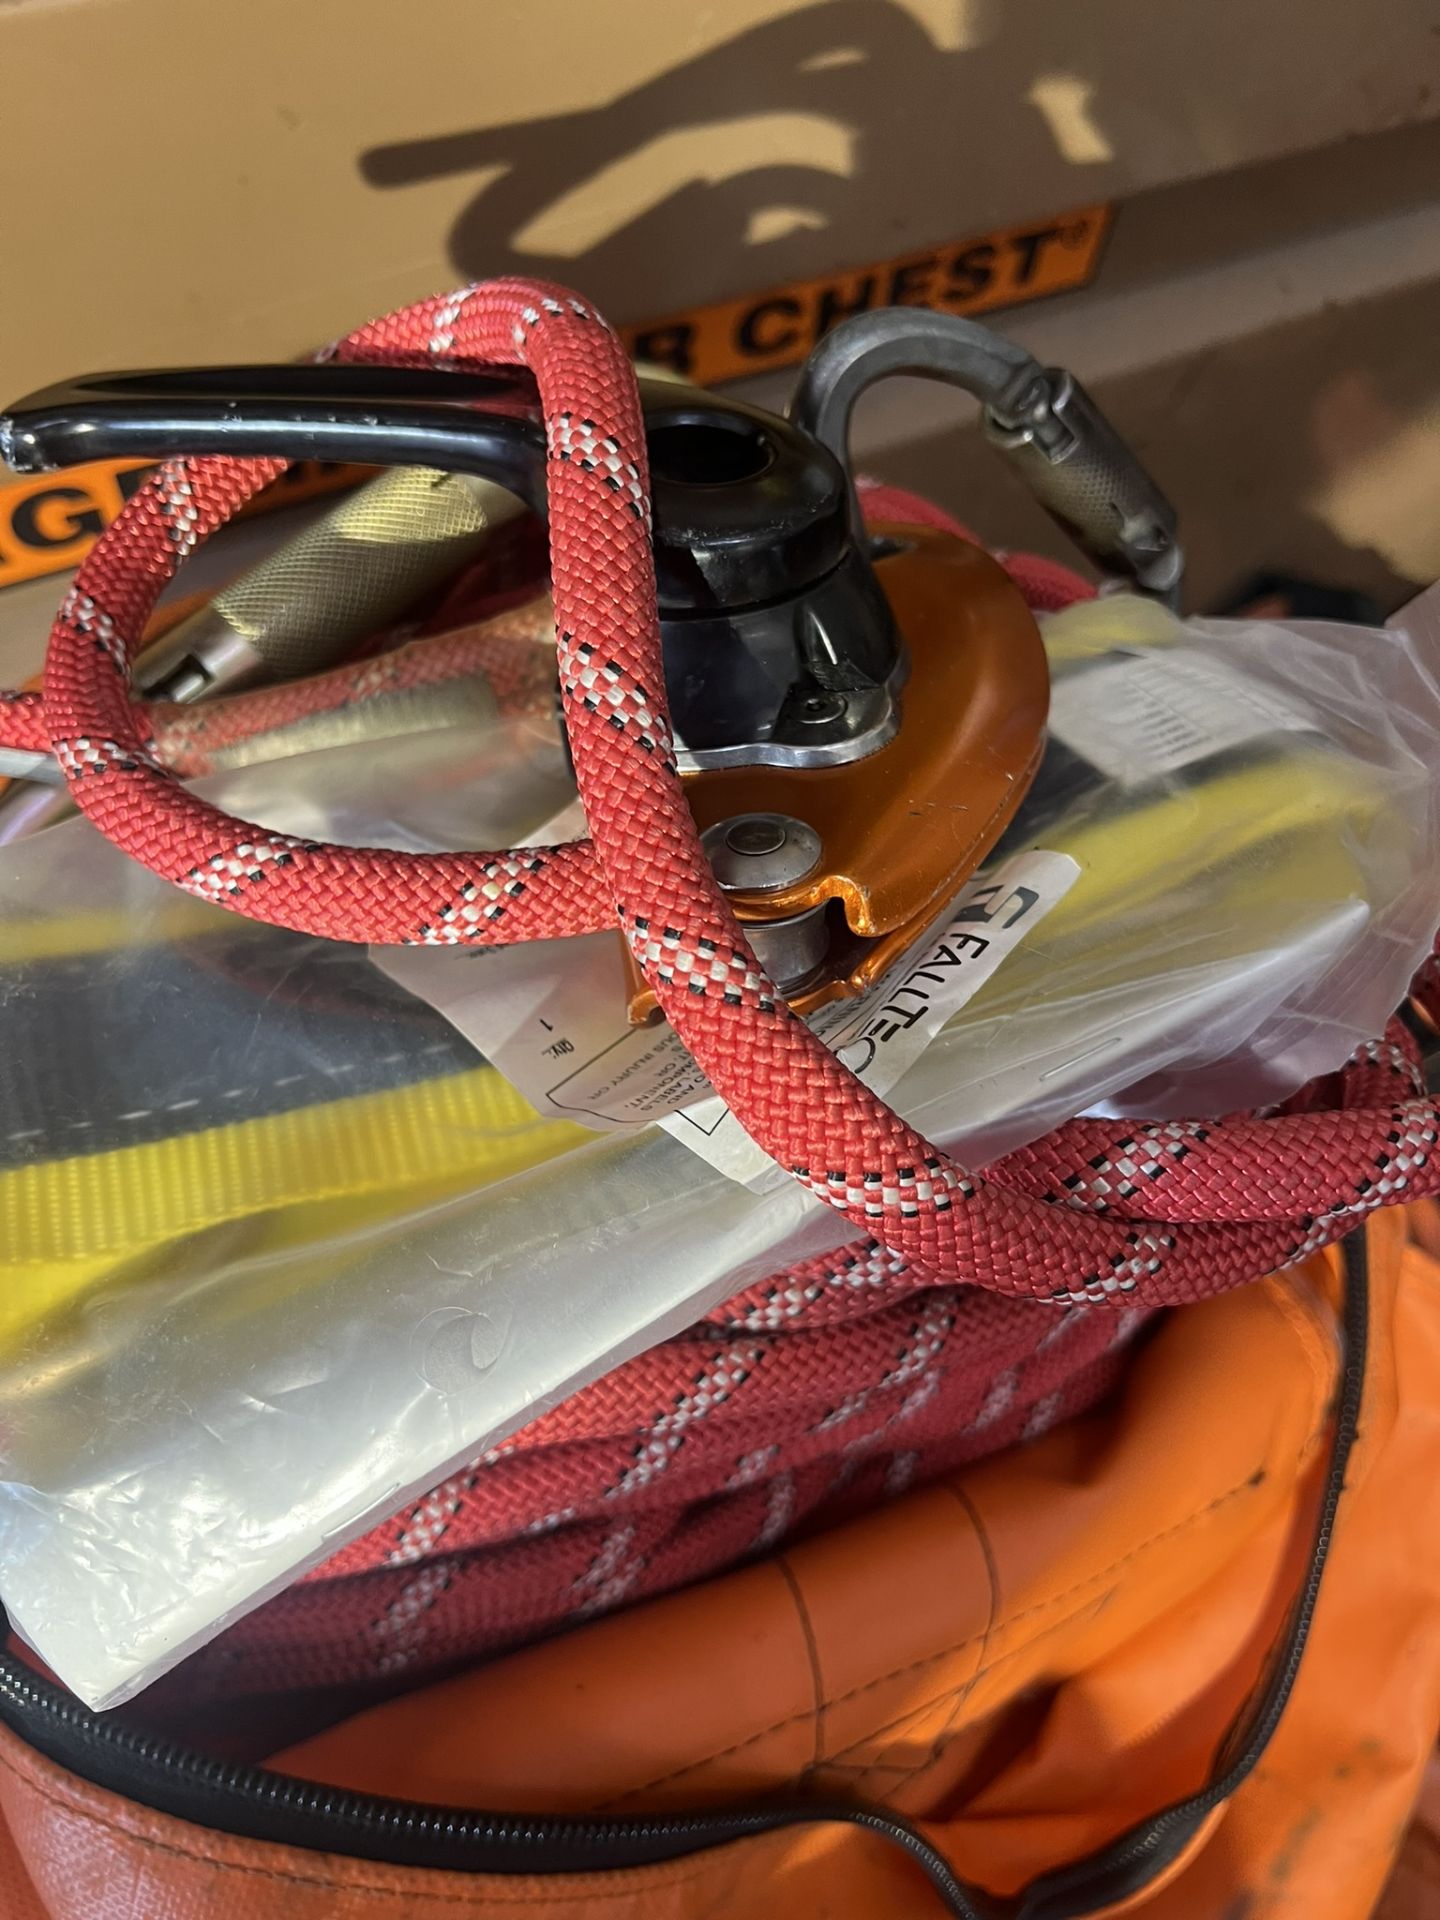 GME Climb Higher Repelling Standard Rescue Kit w/ 600ft ropes - Image 2 of 2